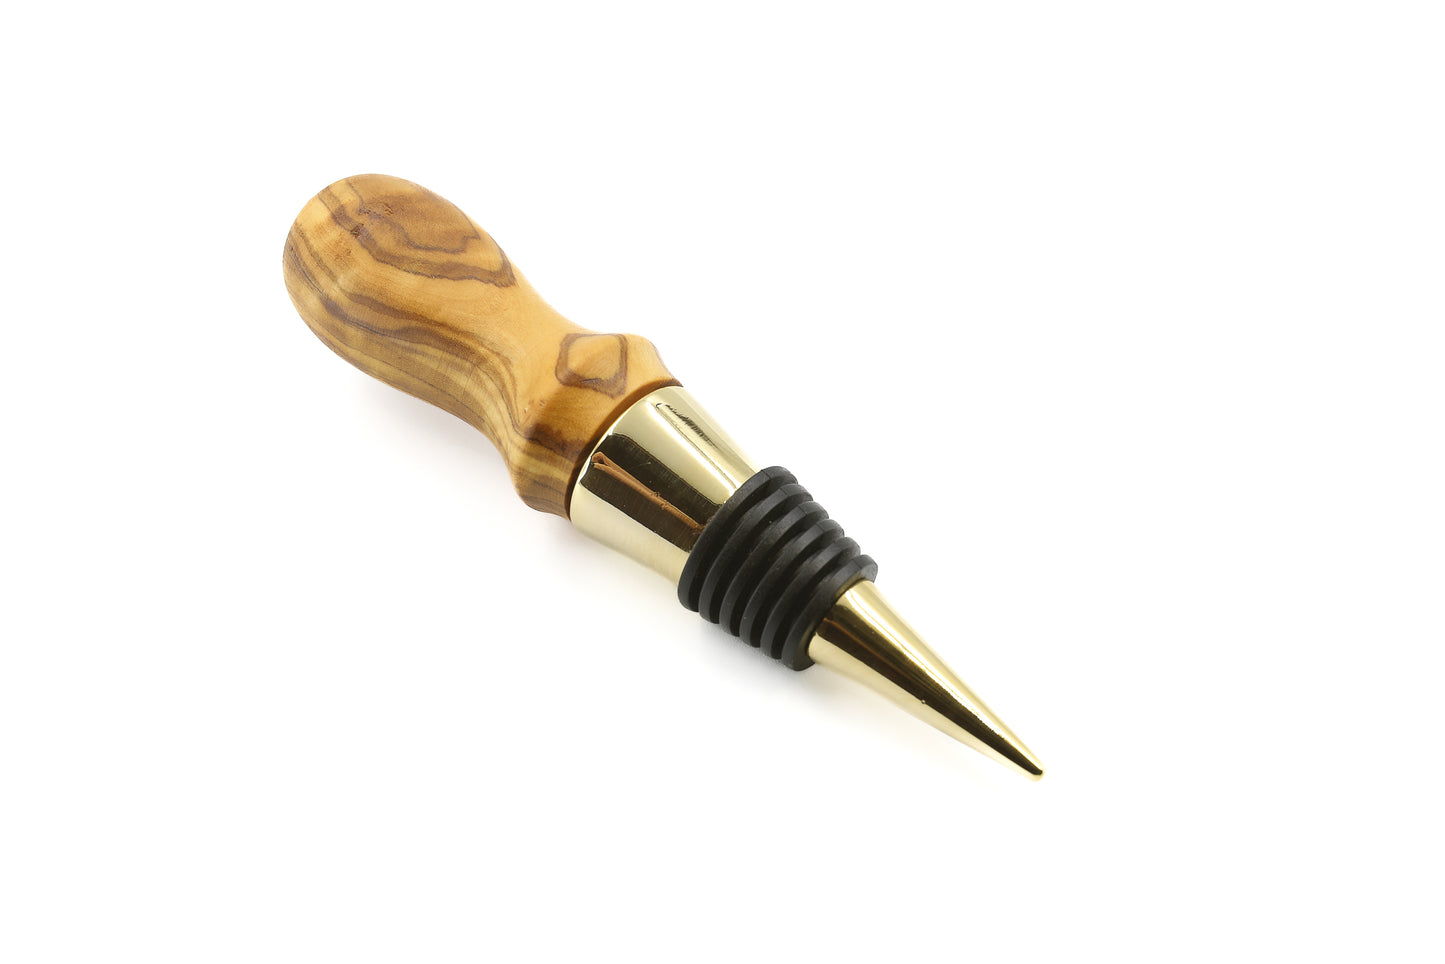 Olive wood wine stopper with a one-of-a-kind charm